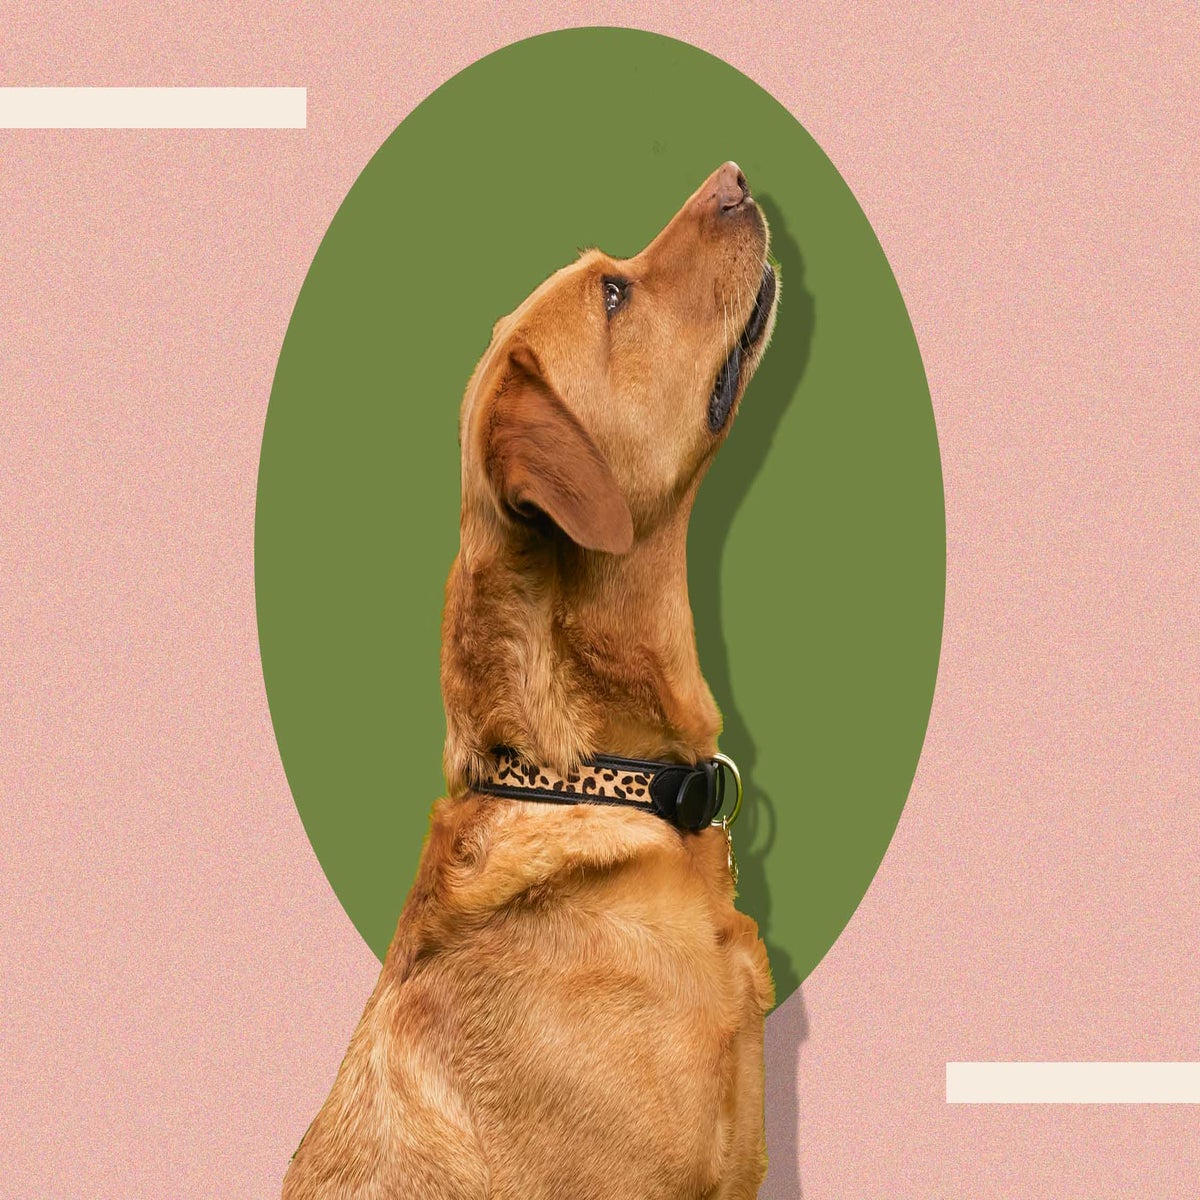 Dog Collars - Choose the Perfect Collar for Your Dog